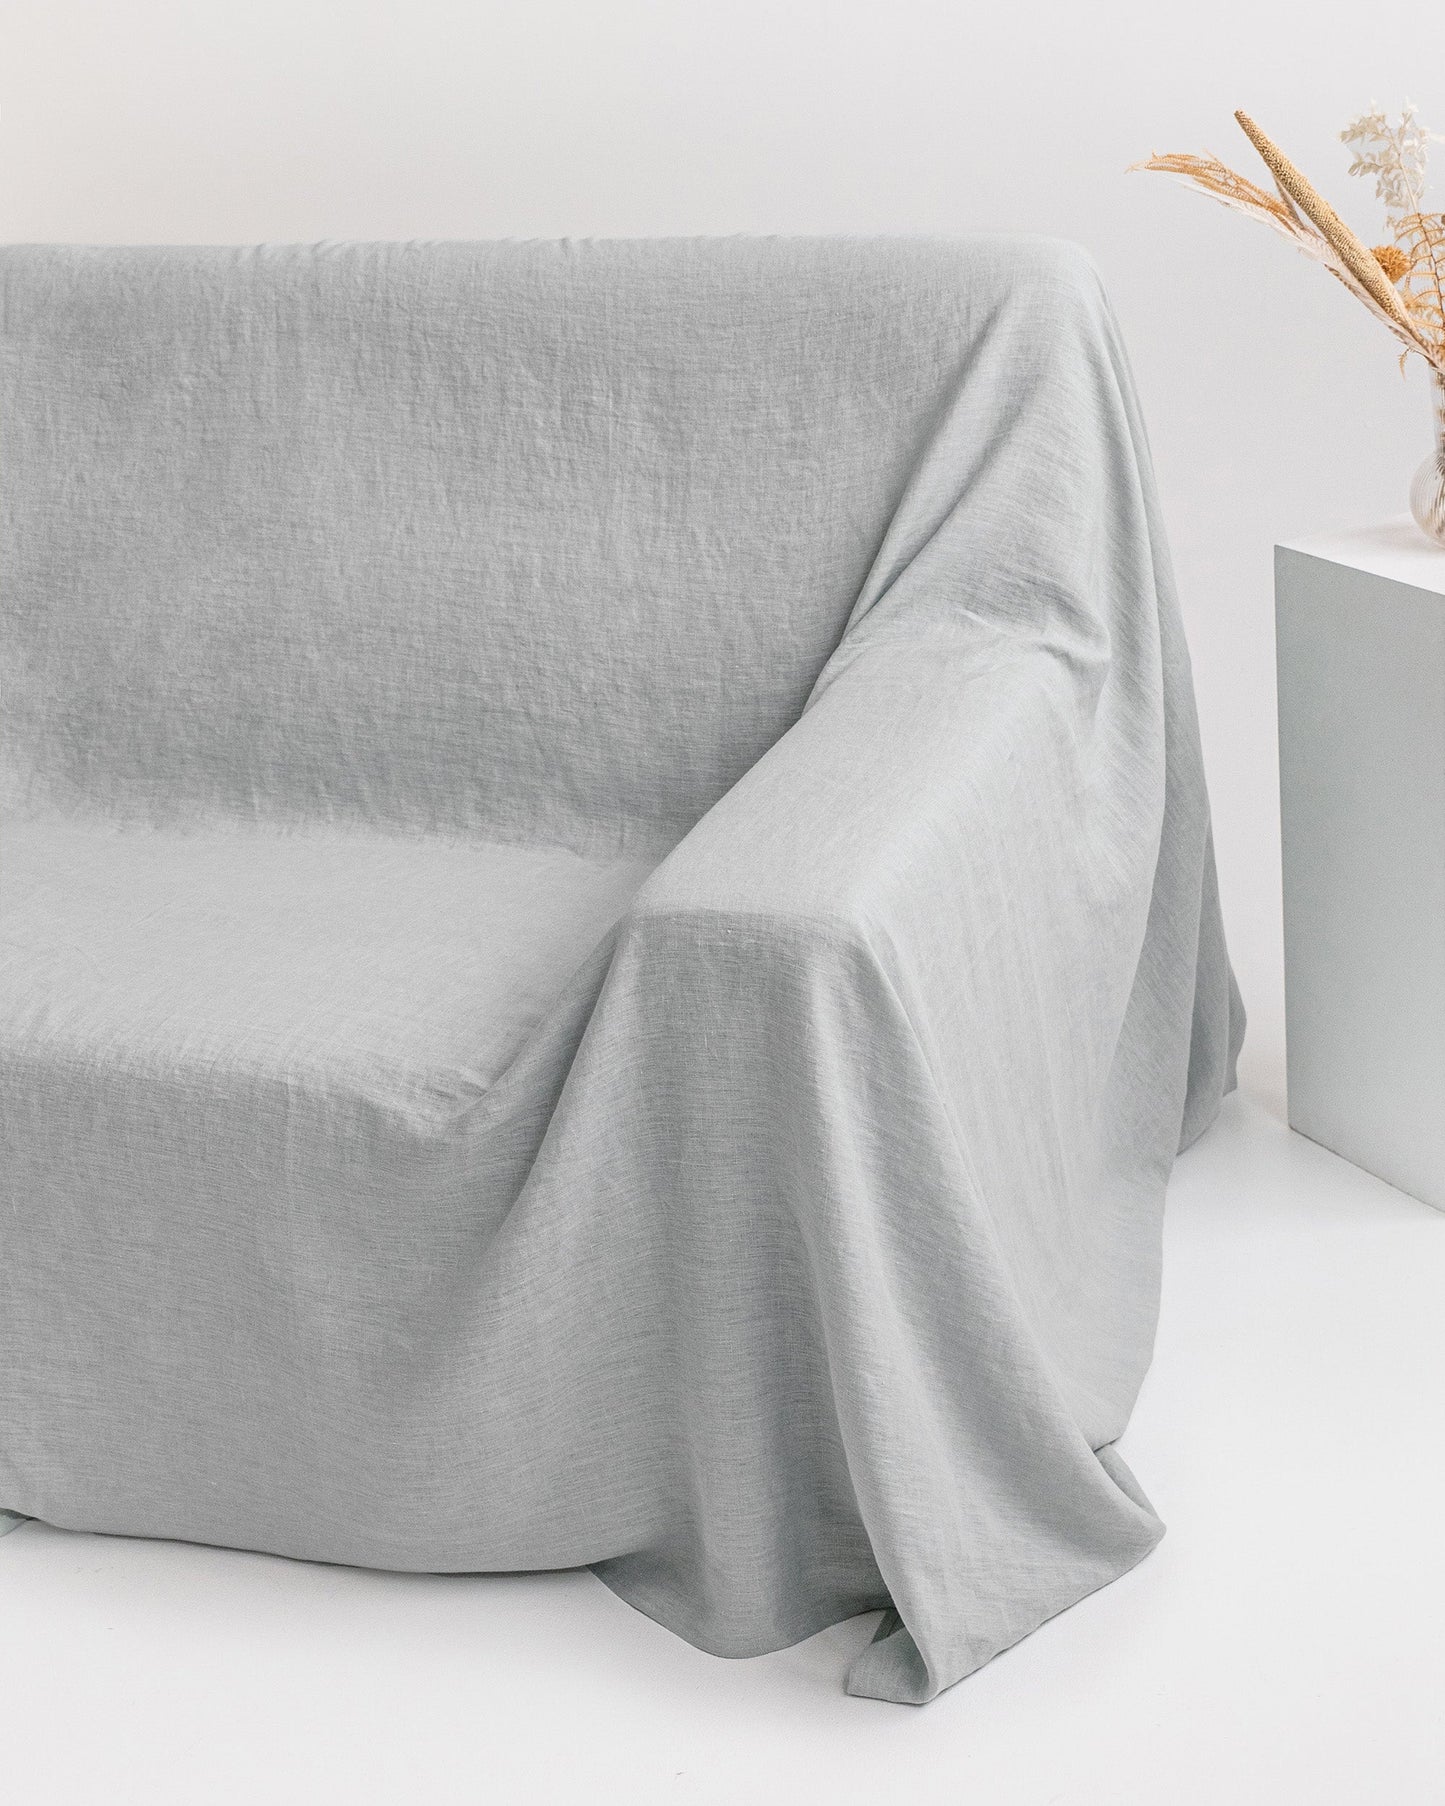 Custom size linen couch cover in Light gray - MagicLinen